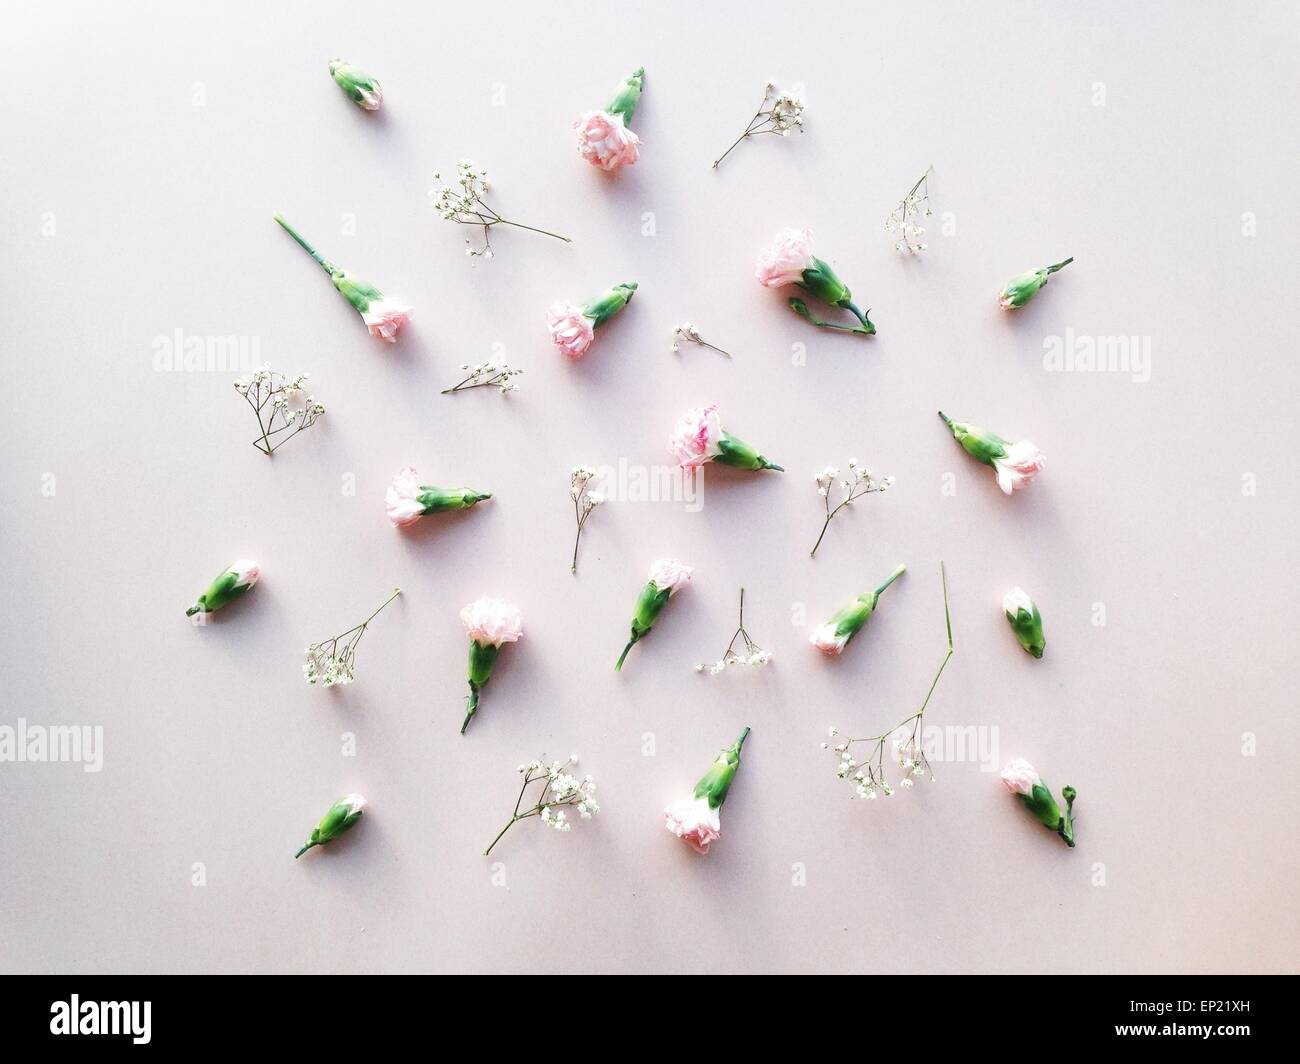 Arrangement of flower buds and flower heads Stock Photo